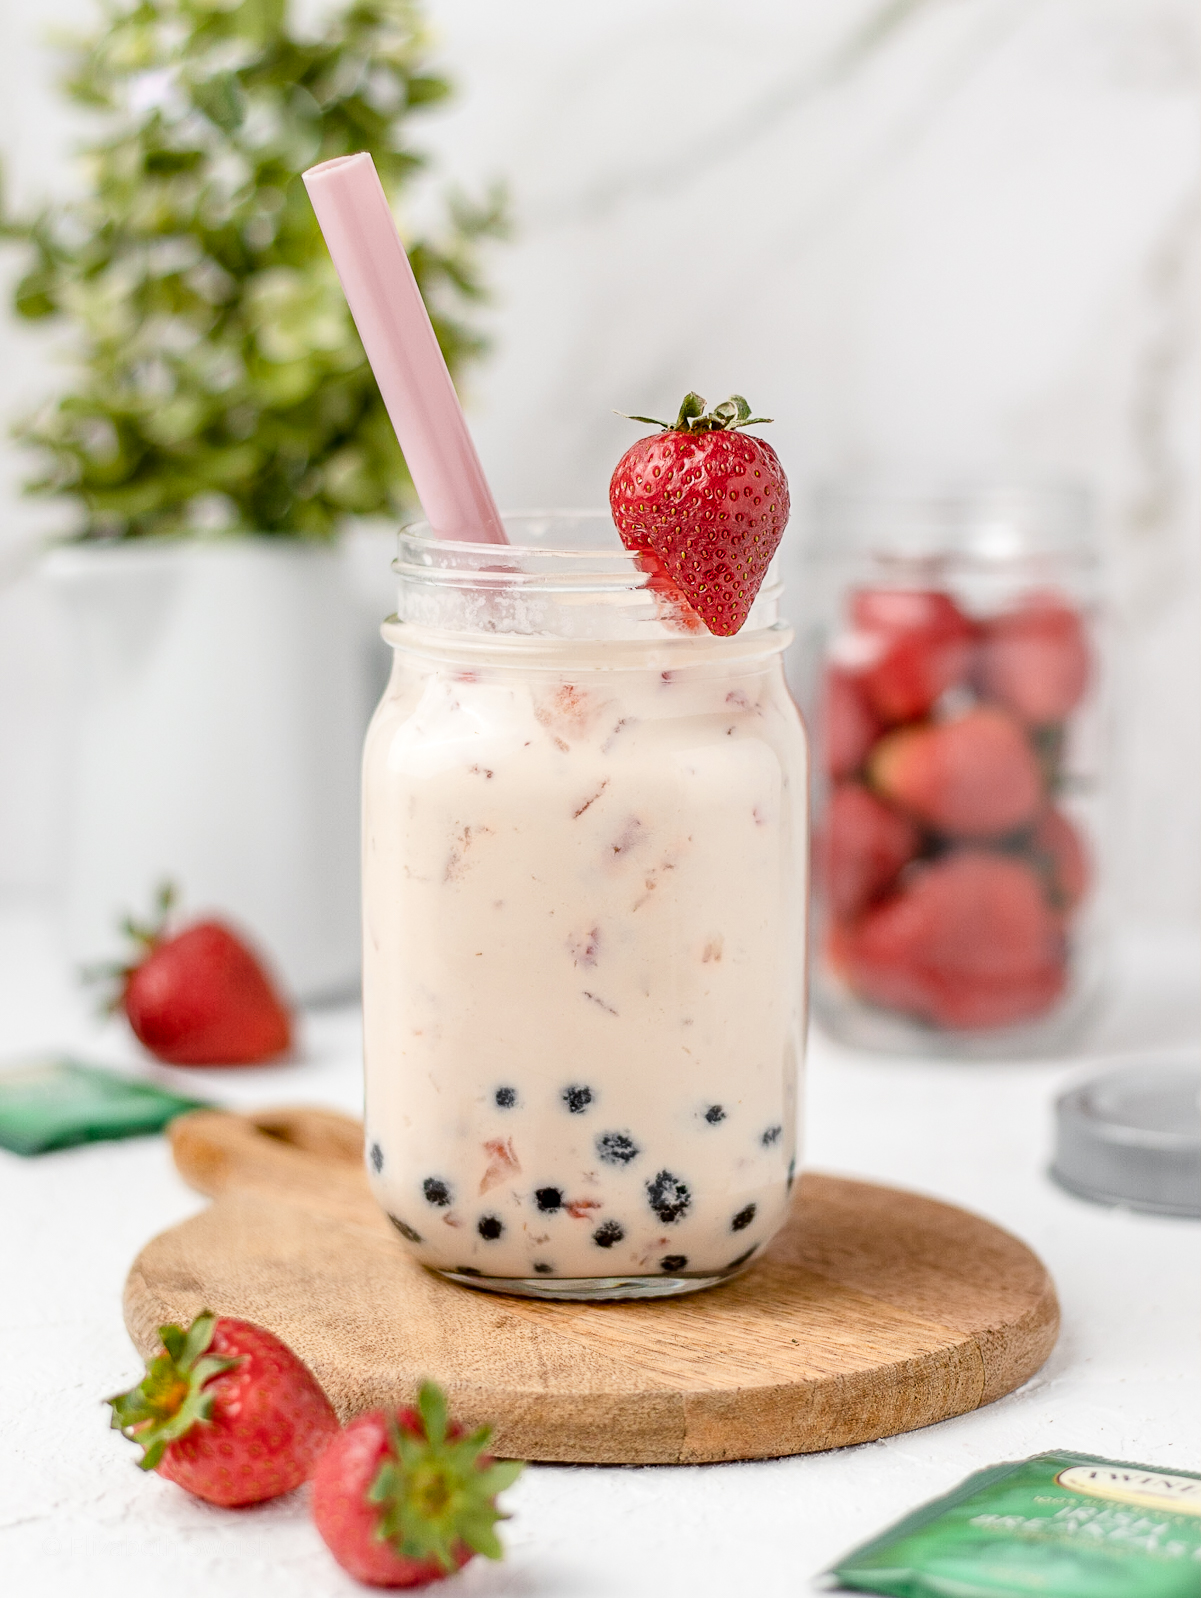 Layers of sweet strawberry, boba, tea, and milk in a jar. Garnished with a fresh strawberry and large pink boba straw.